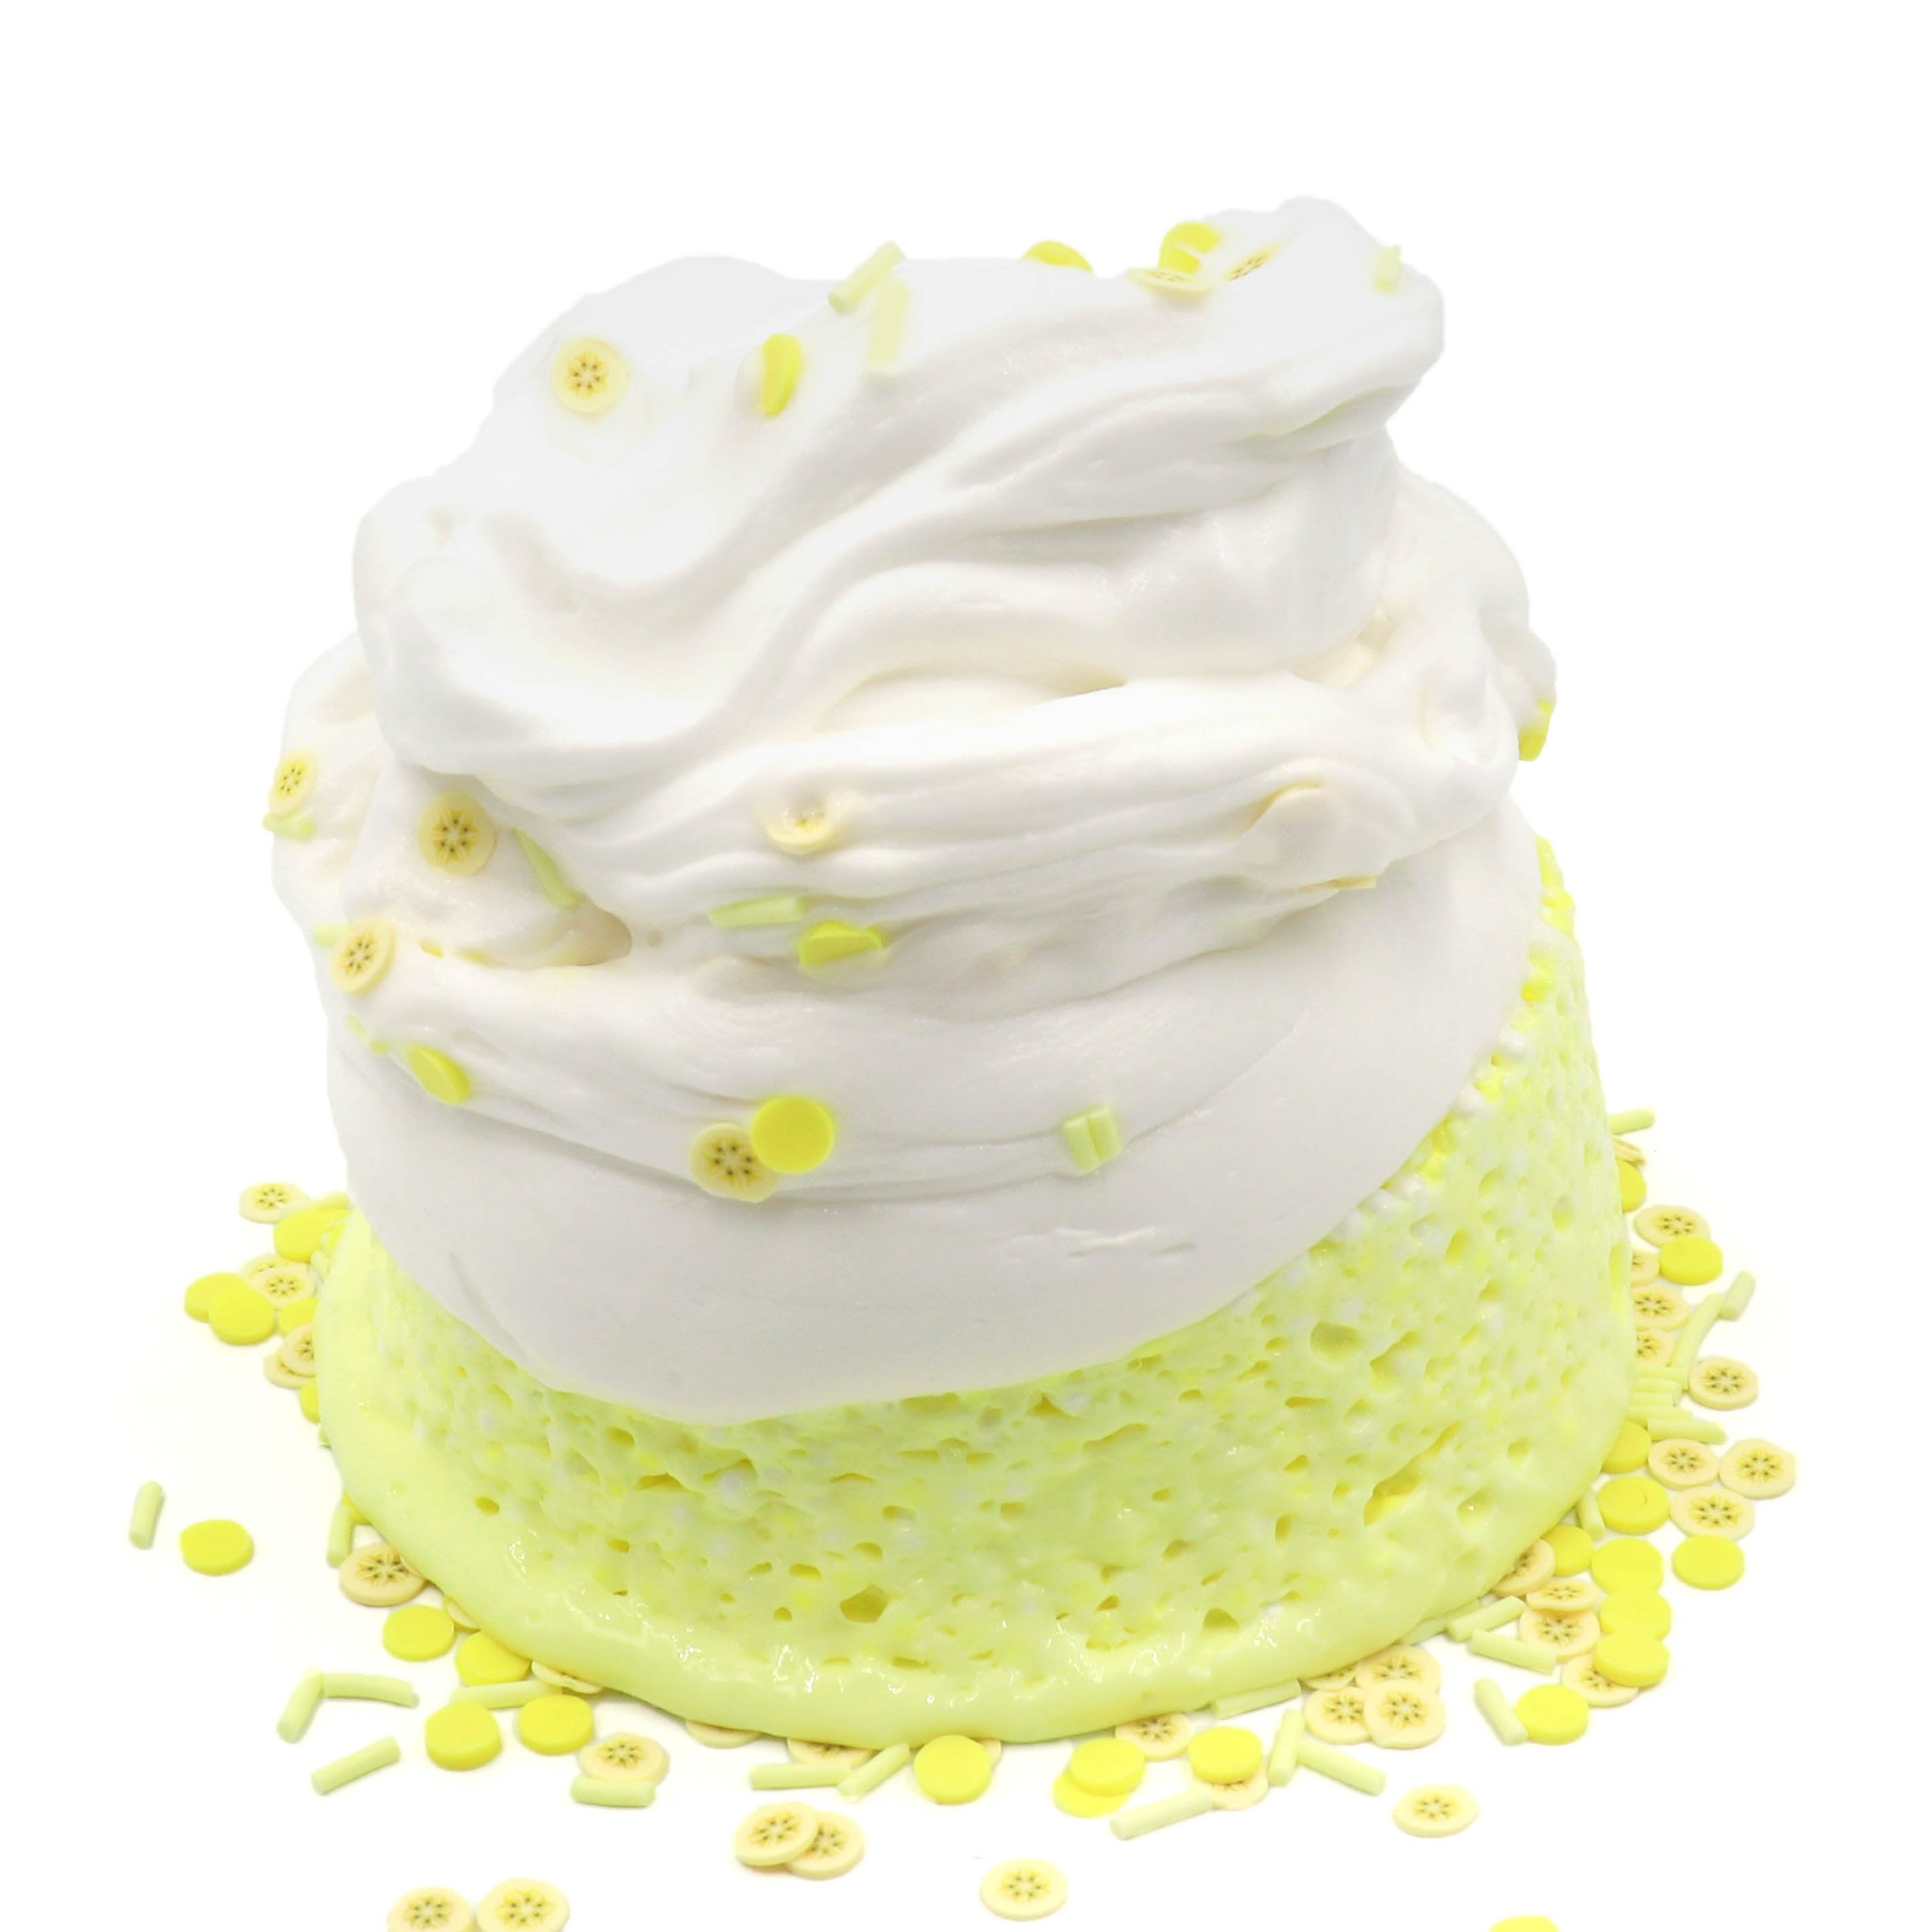 Banana Cream Pie Crunchy Layered Sprinkles Yellow Butter Floam Slime Fantasies Shop 8oz Unboxed